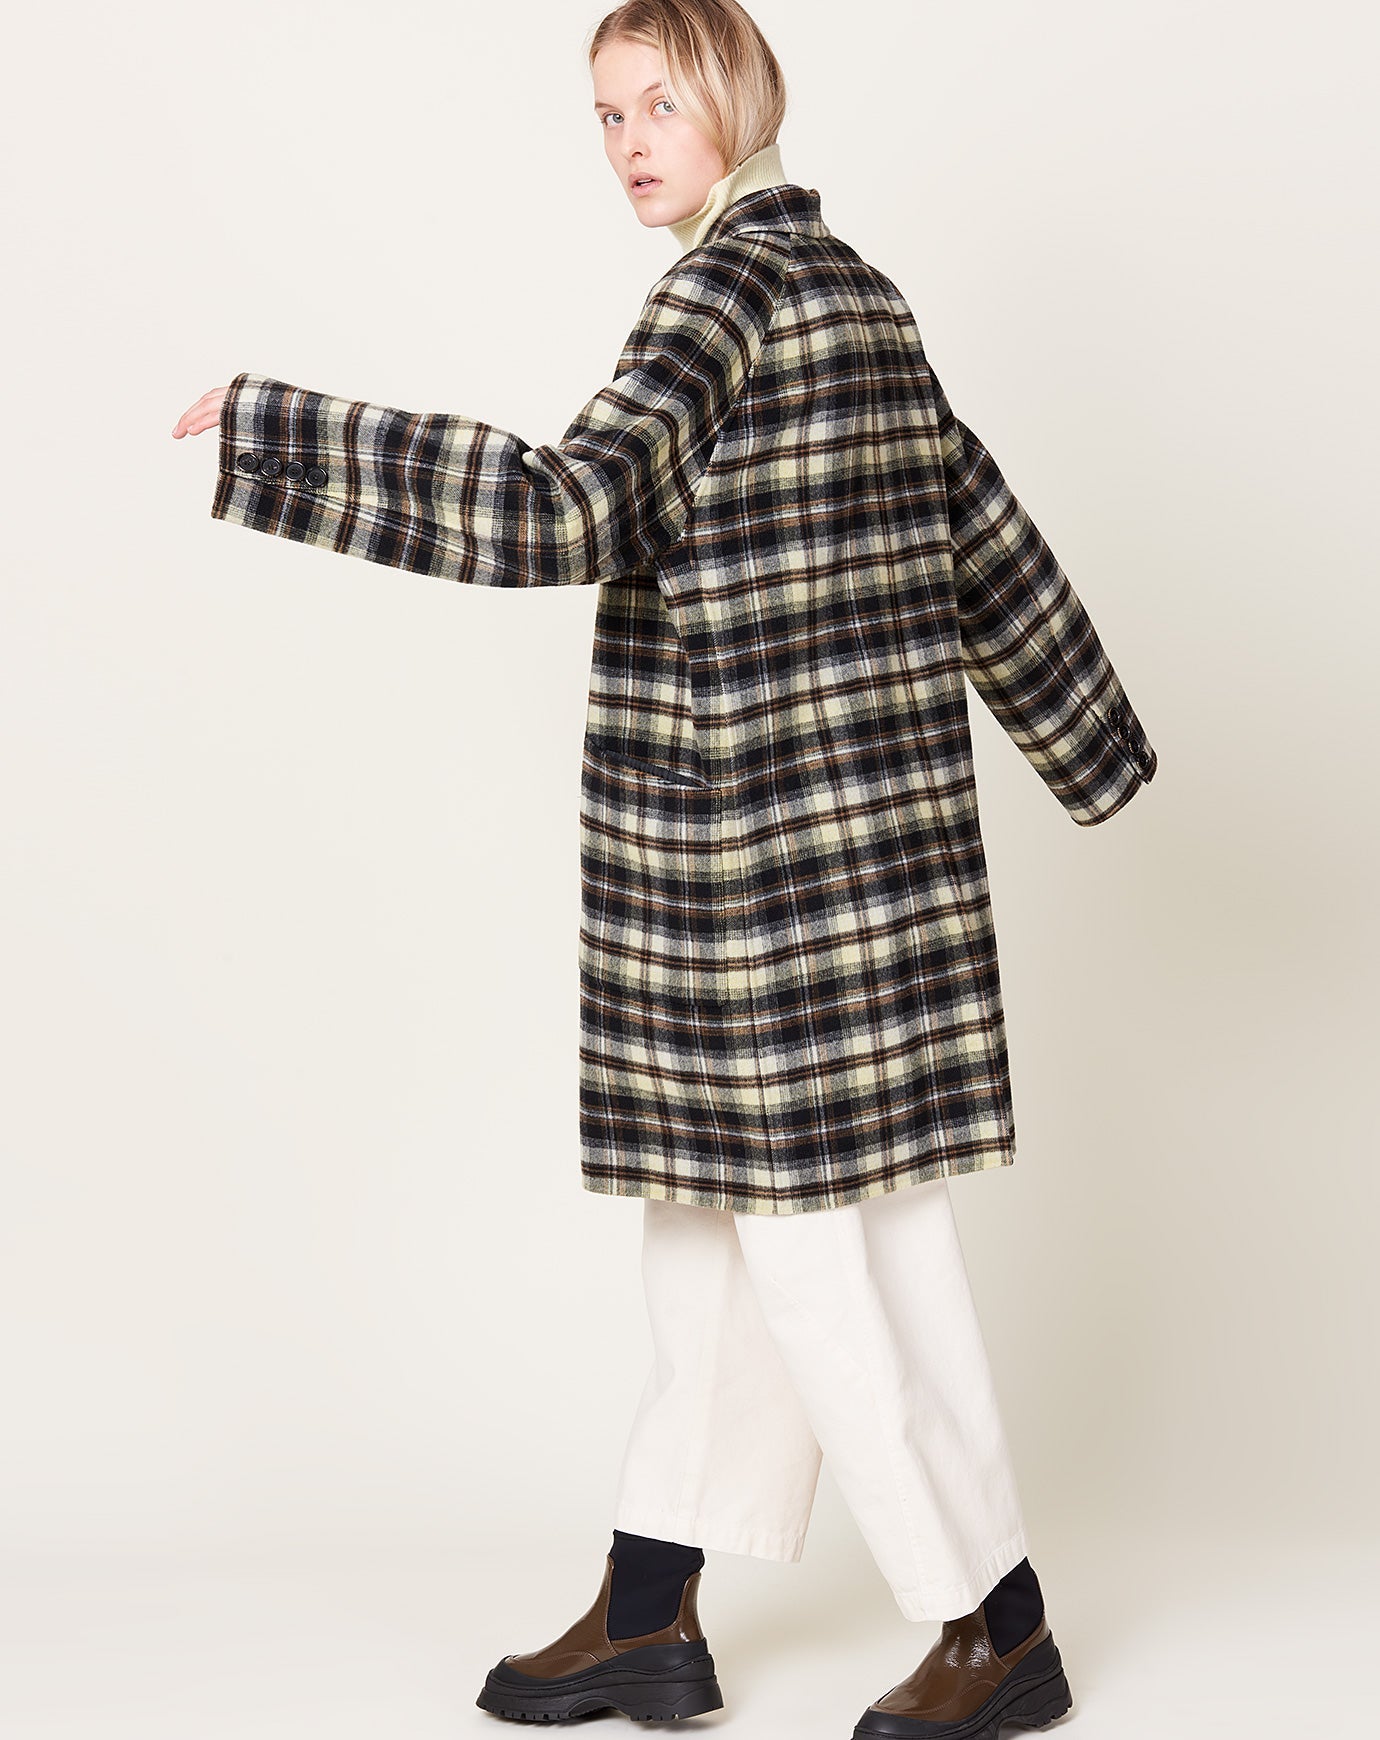 Albie Coat in Navy Double Face Plaid